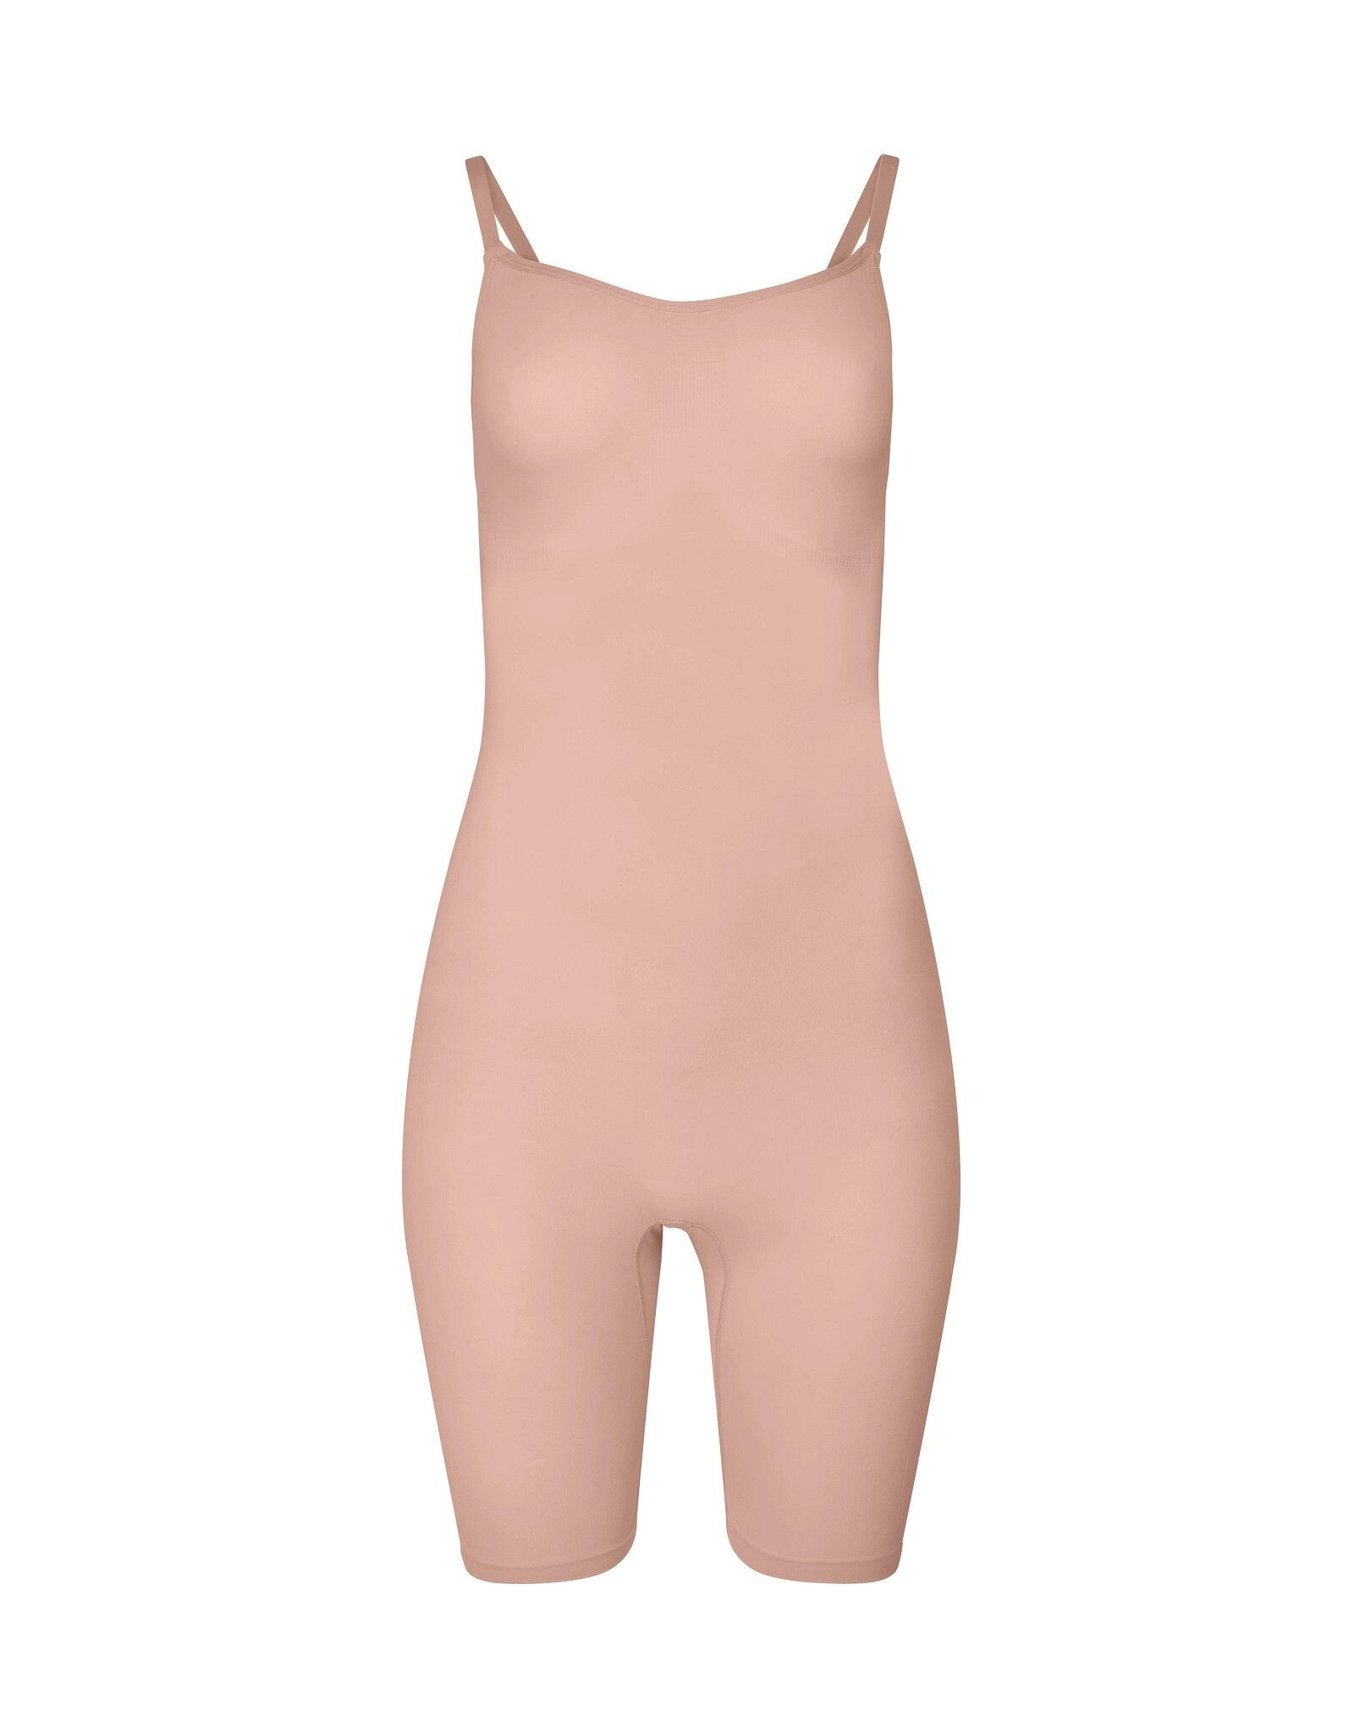 nueskin Analise High-Compression Bodysuit in color Rose Cloud and shape bodysuit